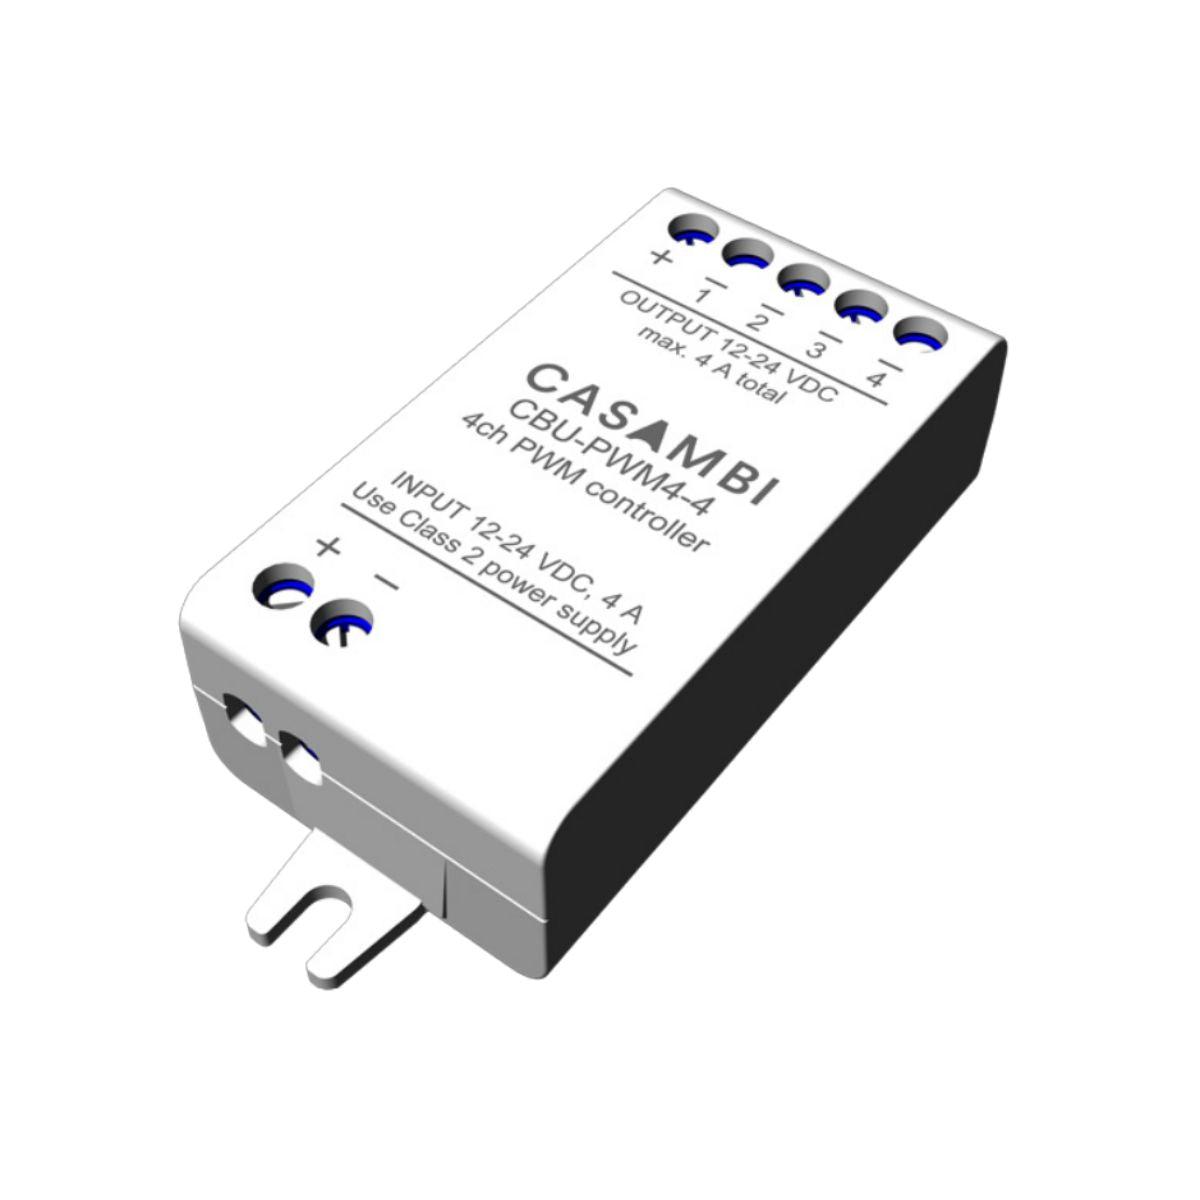 Casambi Bluetooth Controllable, 4 channels, PWM Dimmer, 12-24VDC - Bees Lighting